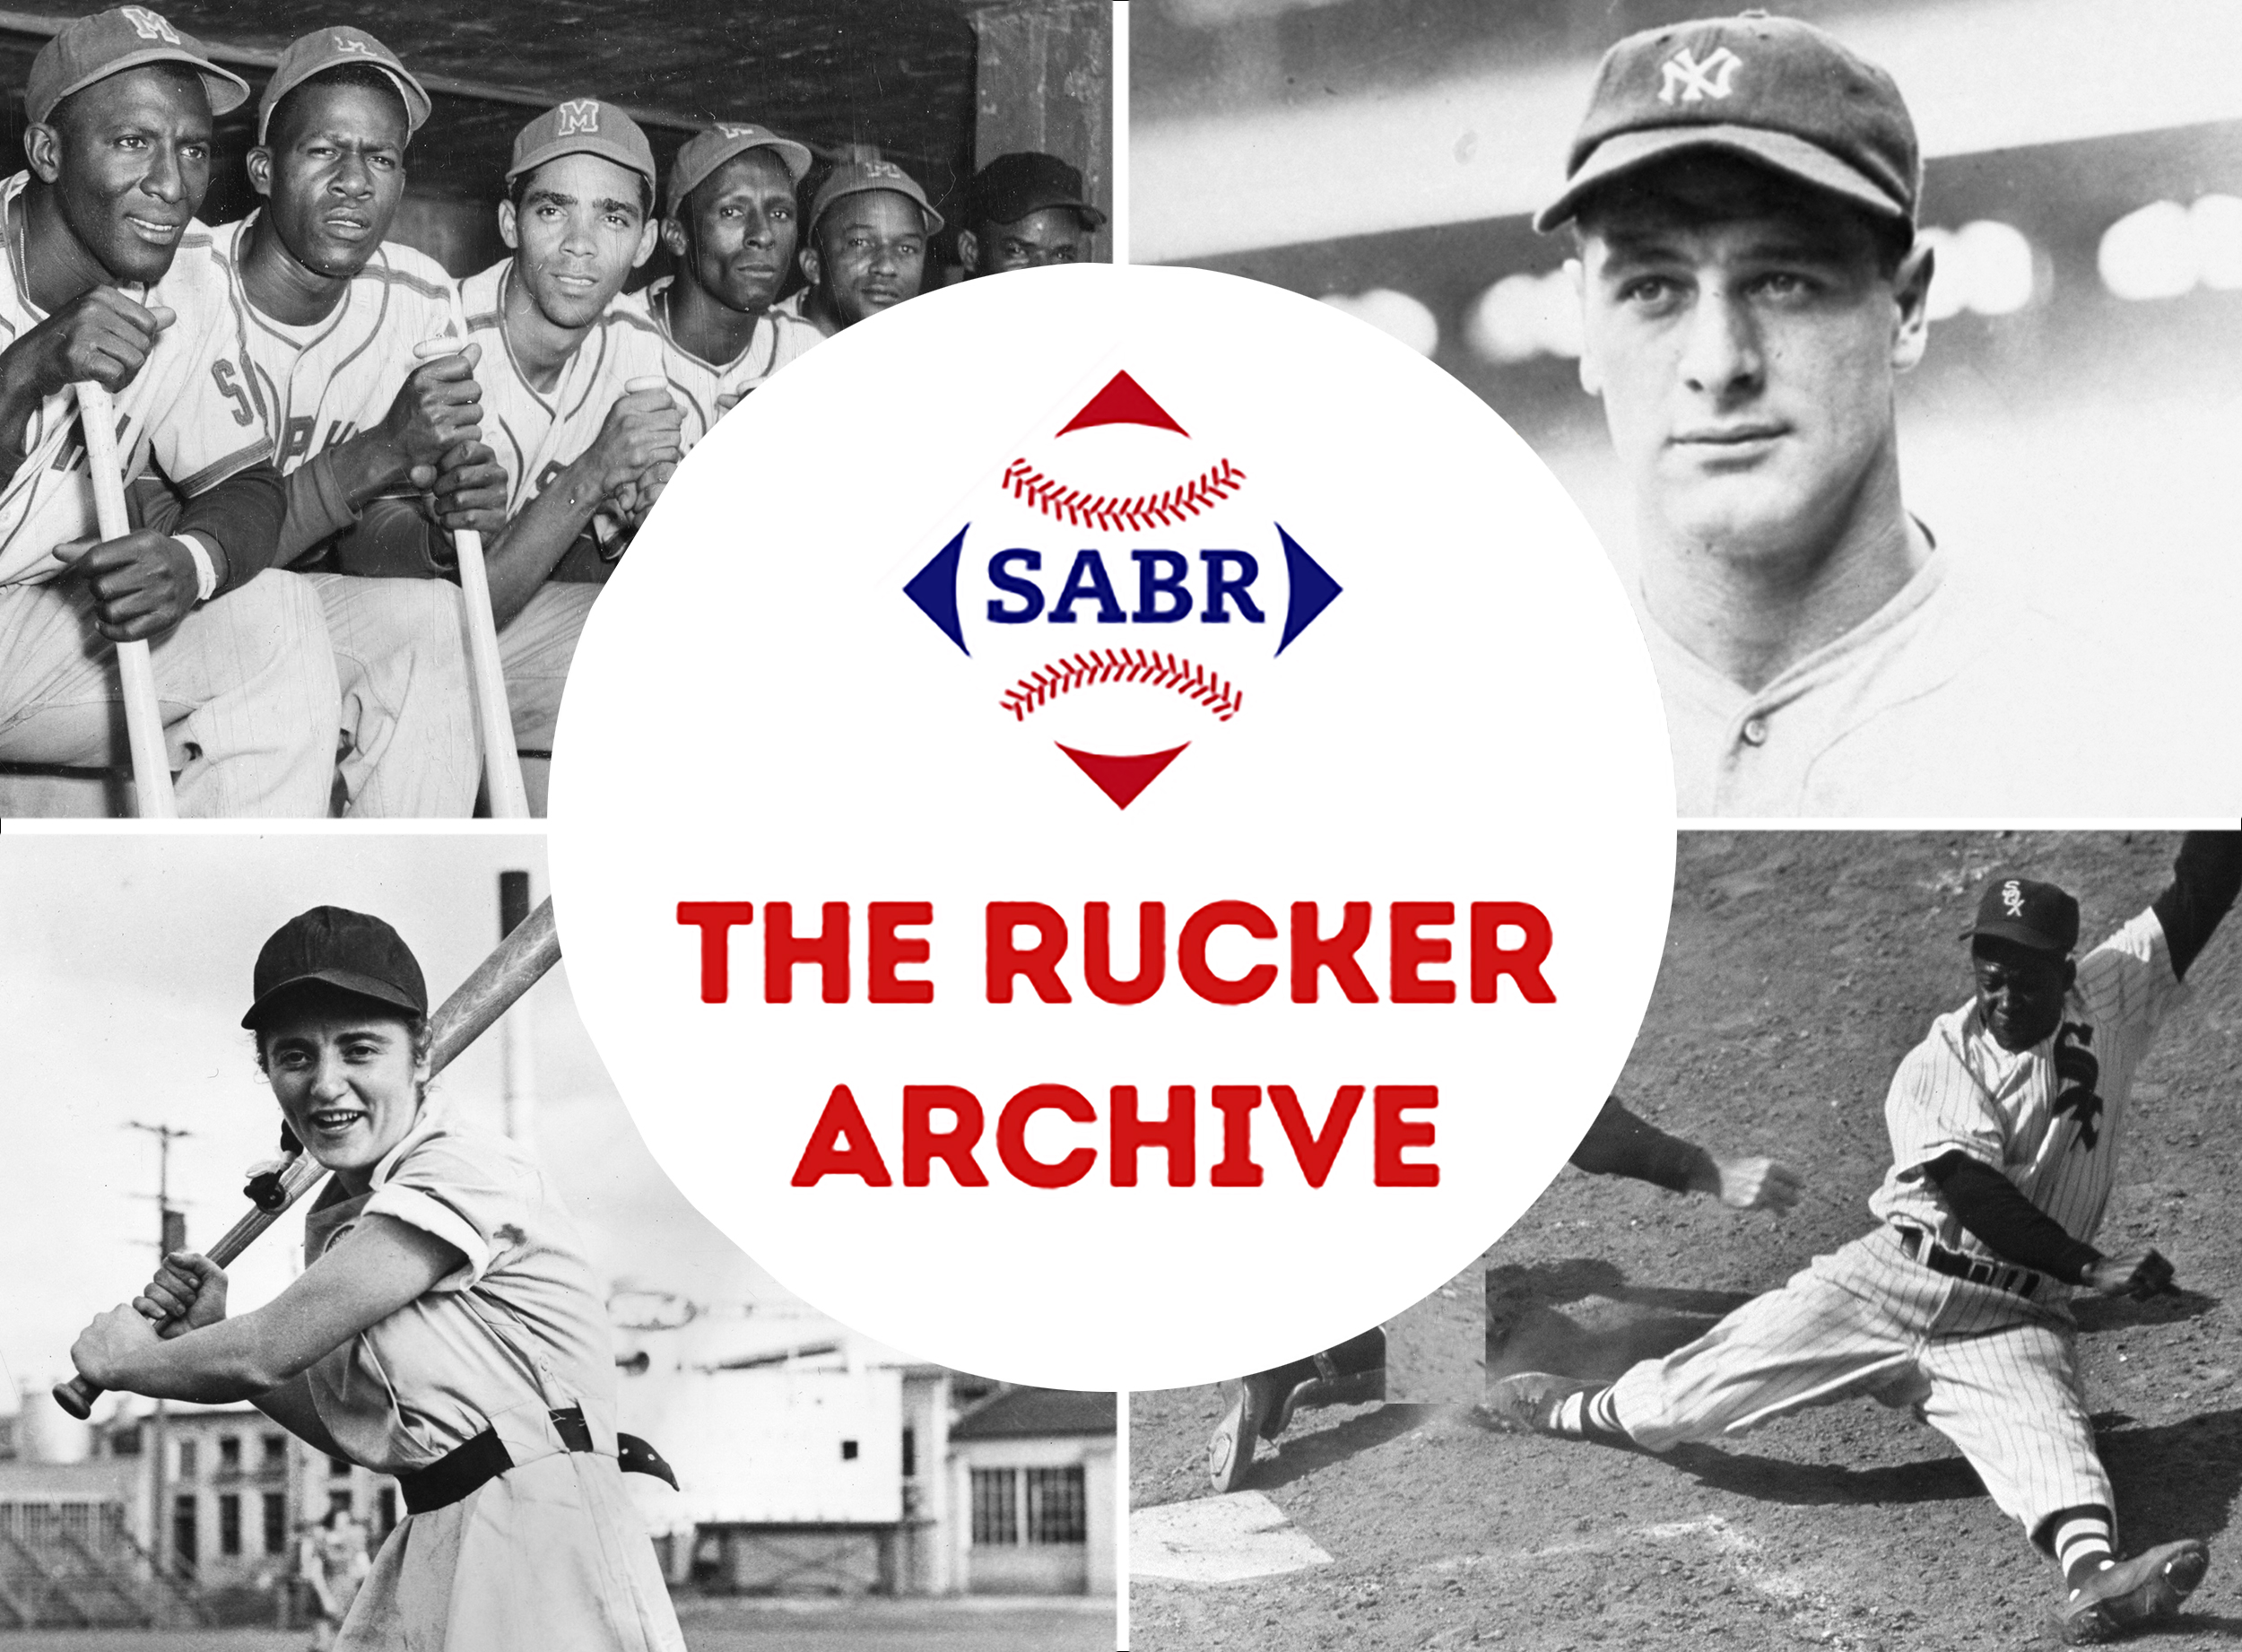 SABR-Rucker Archive (clockwise from top-left): Memphis Red Sox, Lou Gehrig, Minnie Miñoso, Ernestine Petras